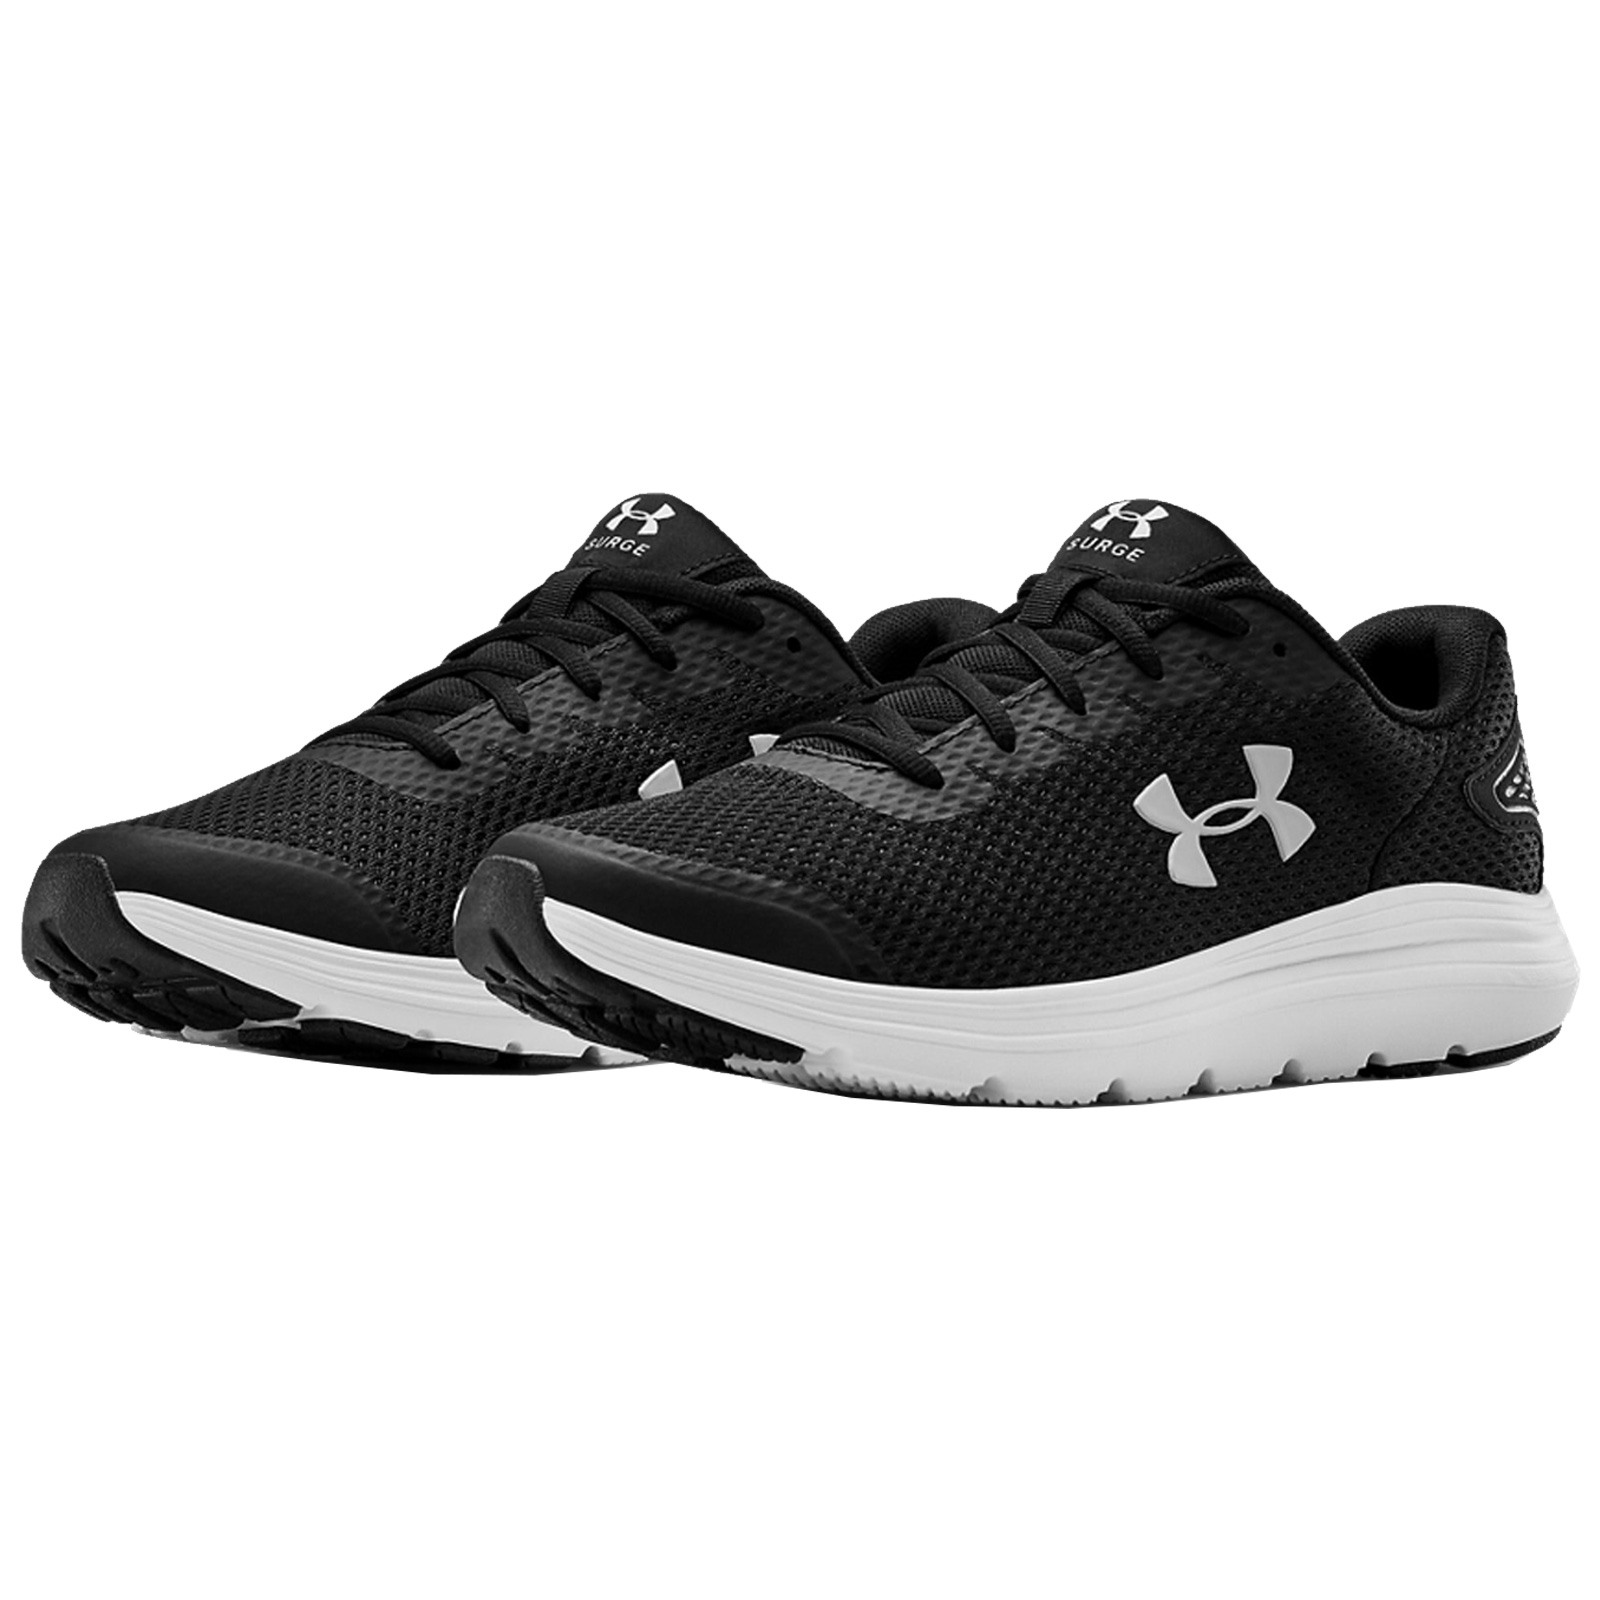 Under Armour Mens Surge 2 Trainers UA Gym Running Shoes Walking ...